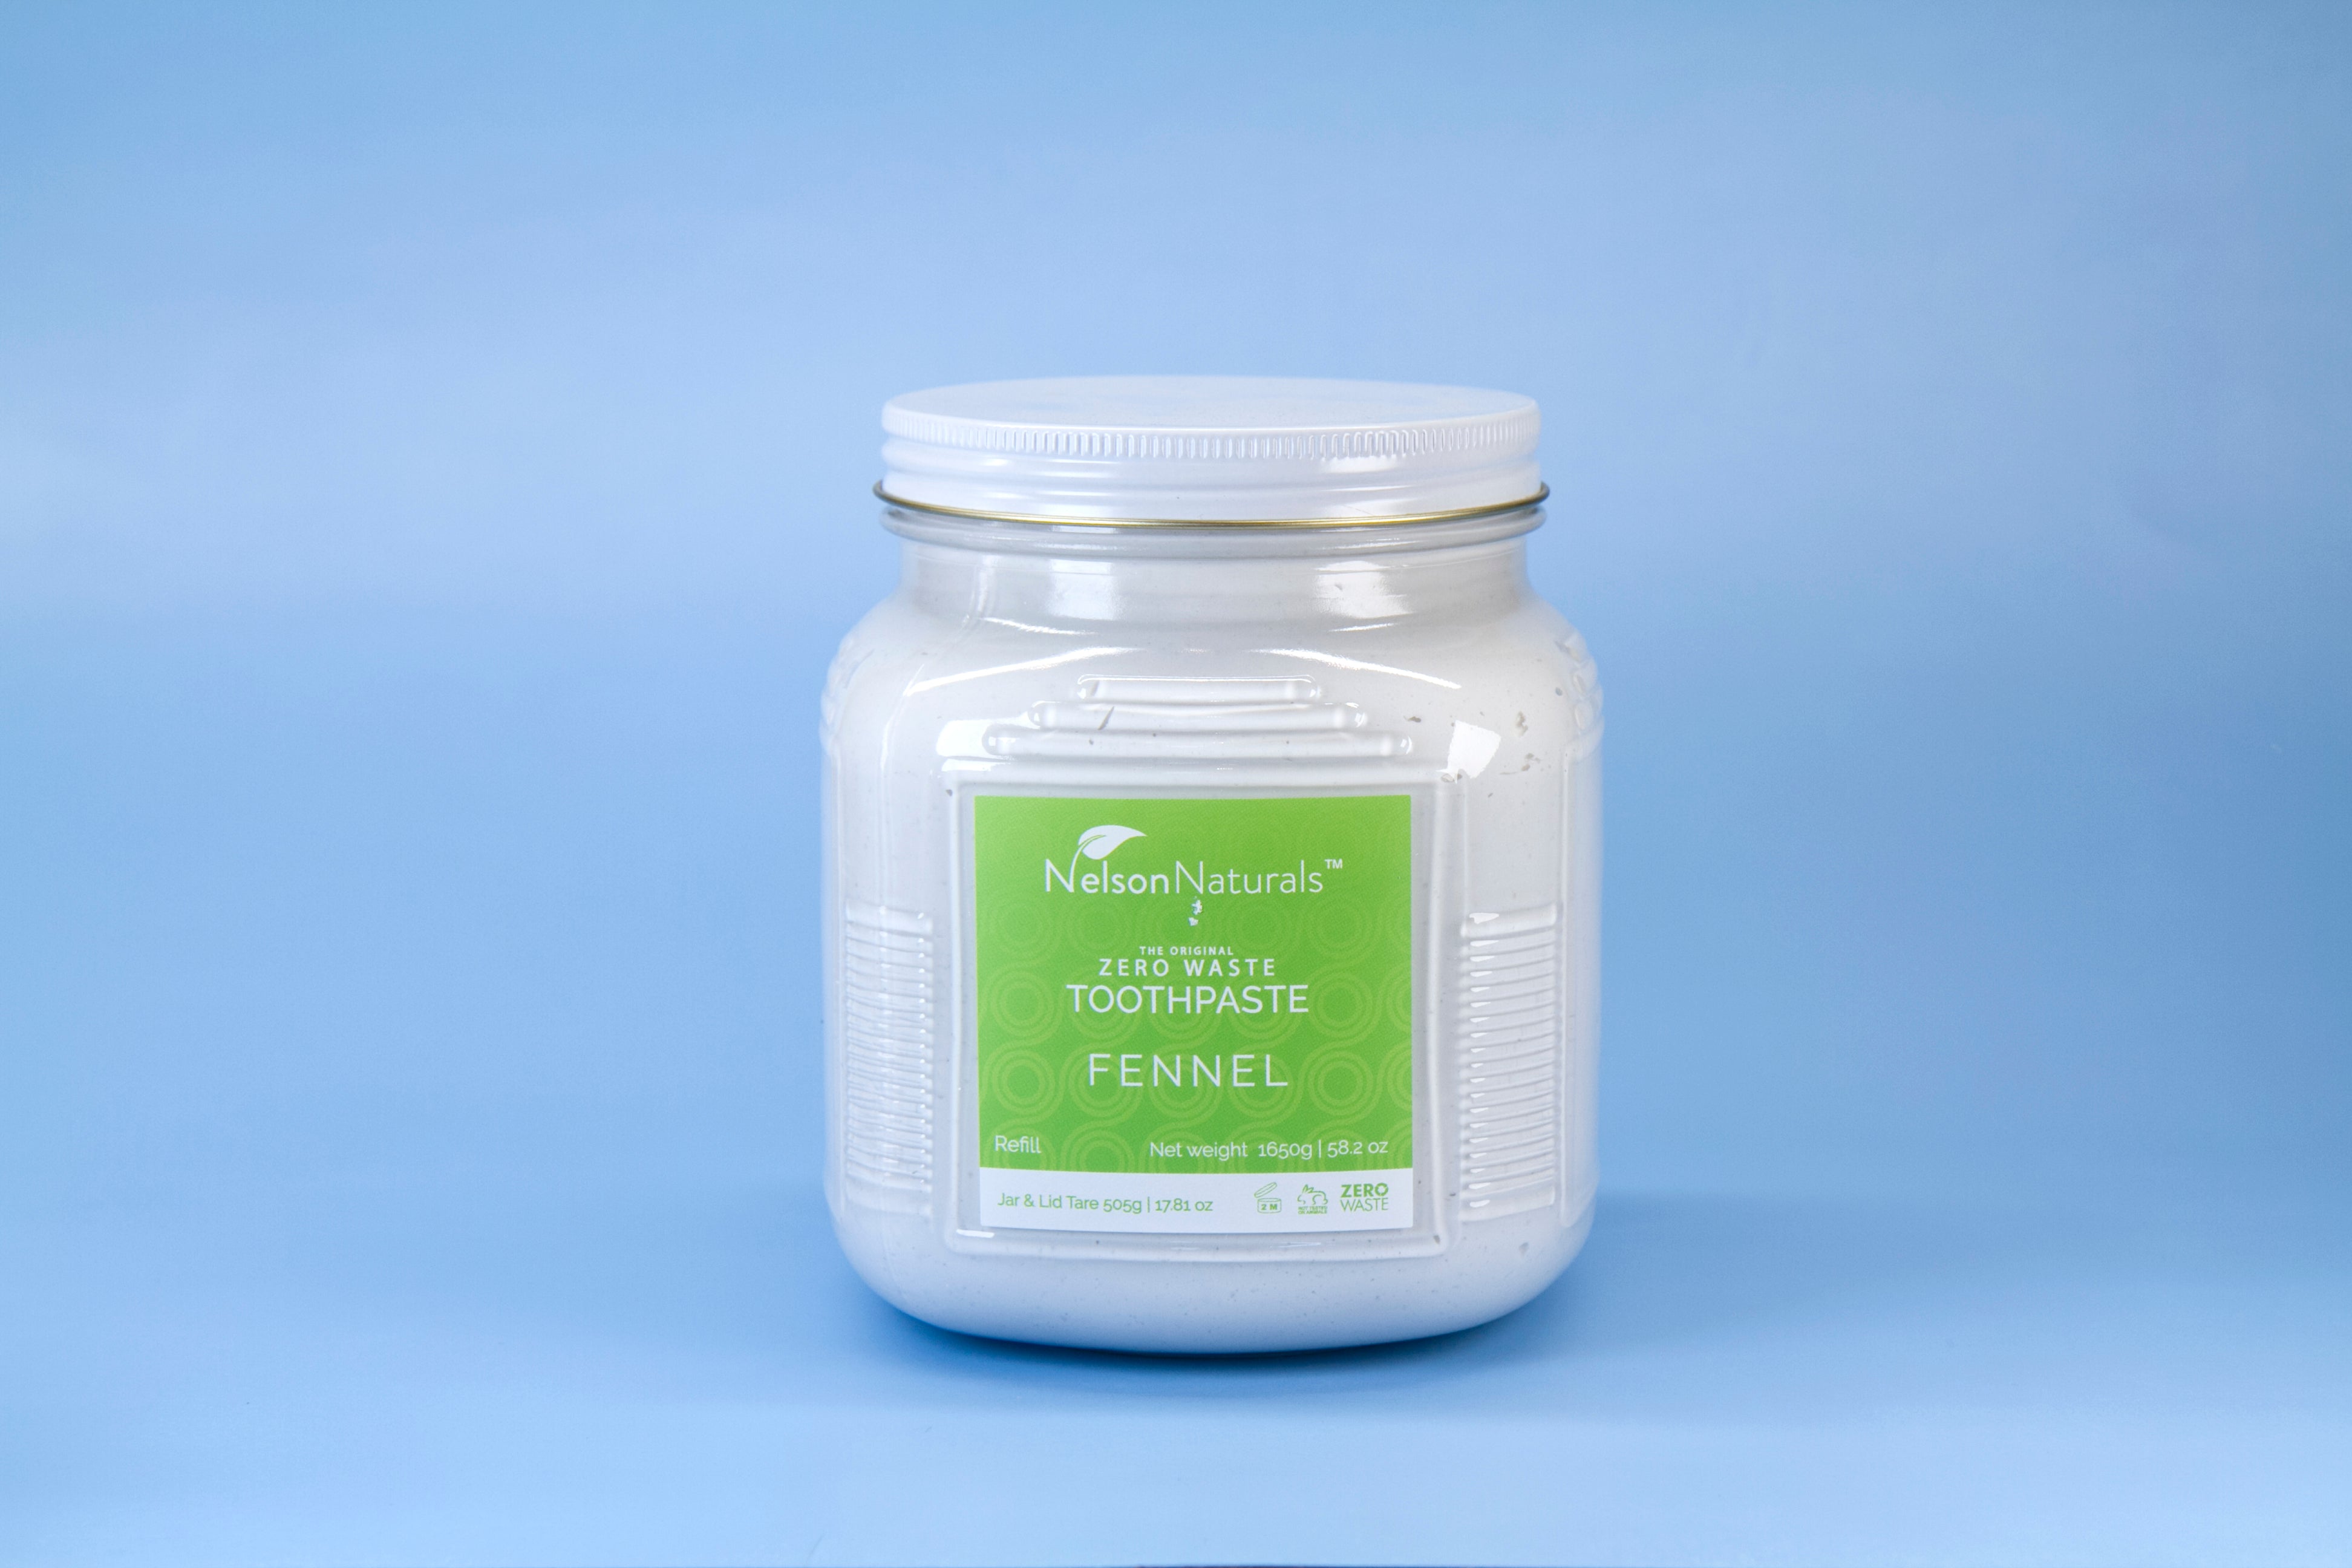 Fennel Bulk Toothpaste 1650 g - NEW IMPROVED GLASS JAR - Wholesale Toothpaste - nelsonnaturals remineralizing toothpaste